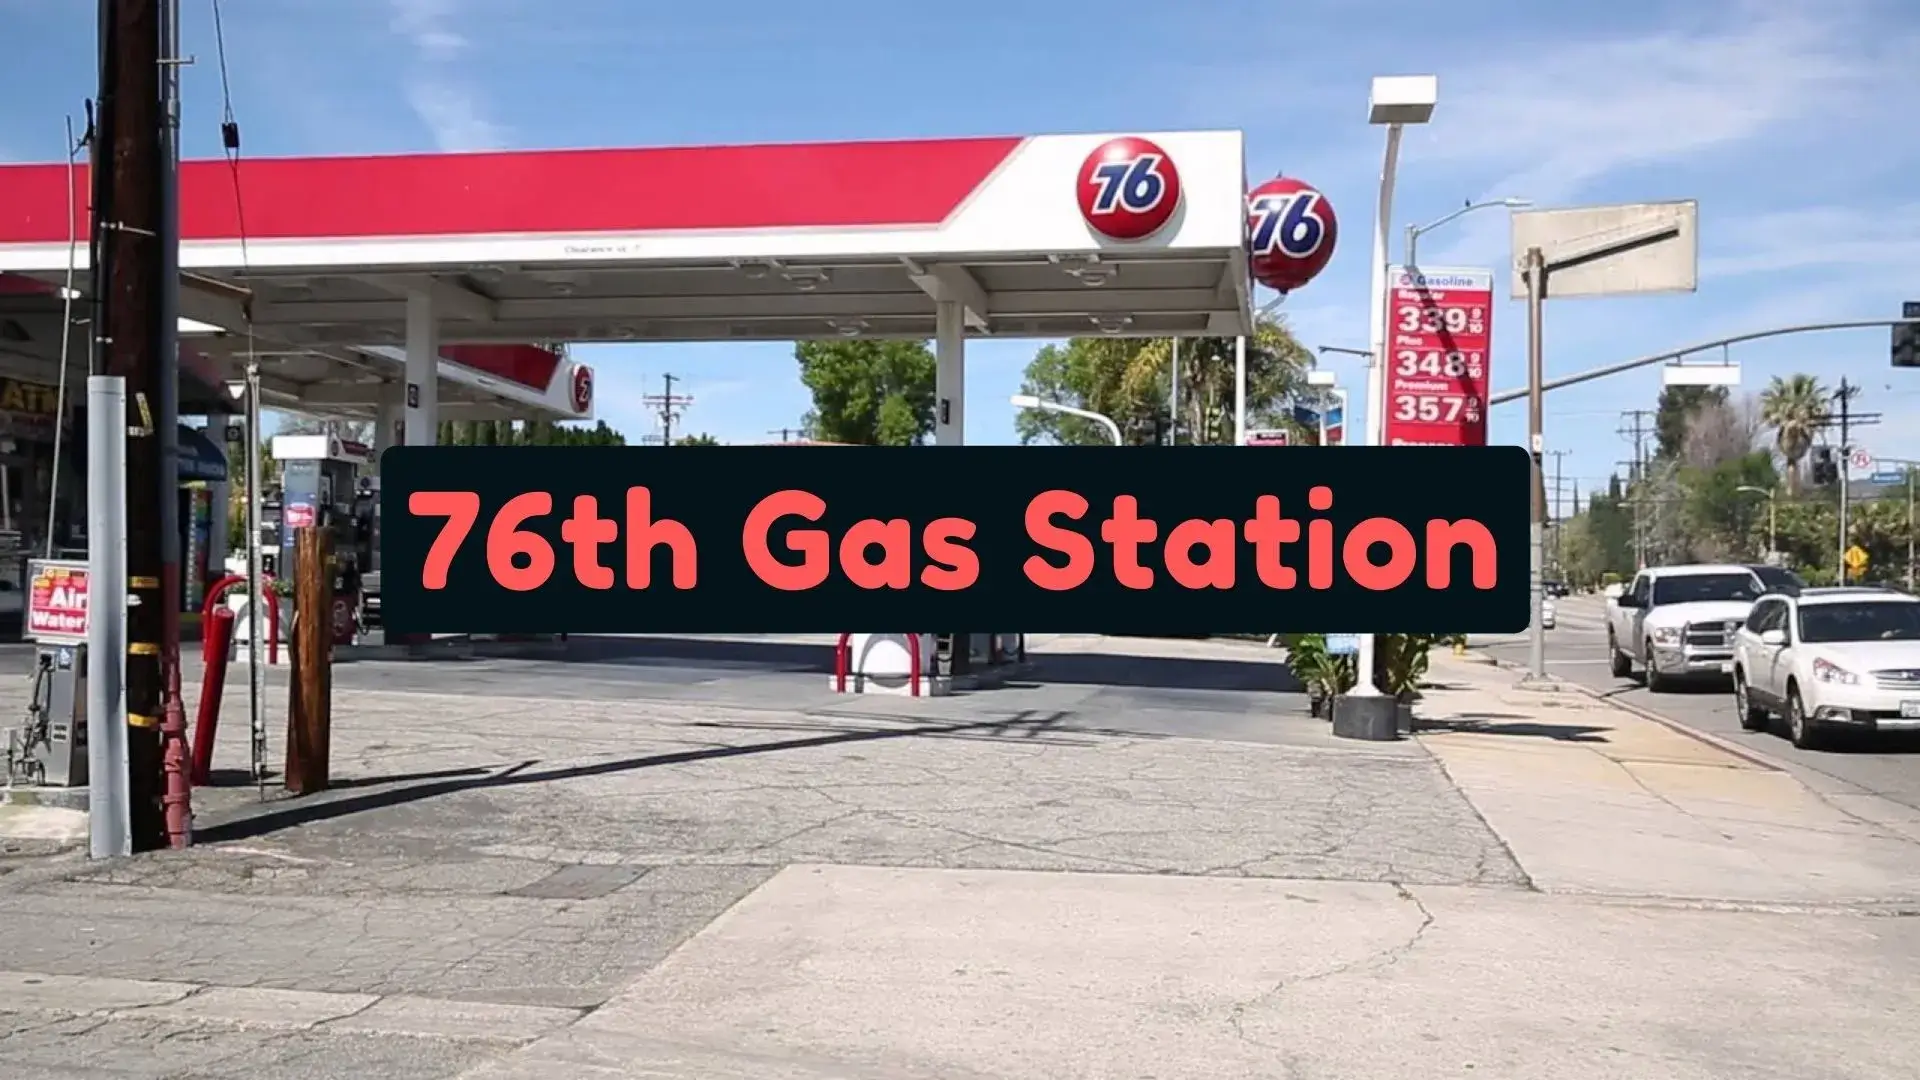 76 Gas Station Near Me: 24/7 Convenience and Top Tier Gas